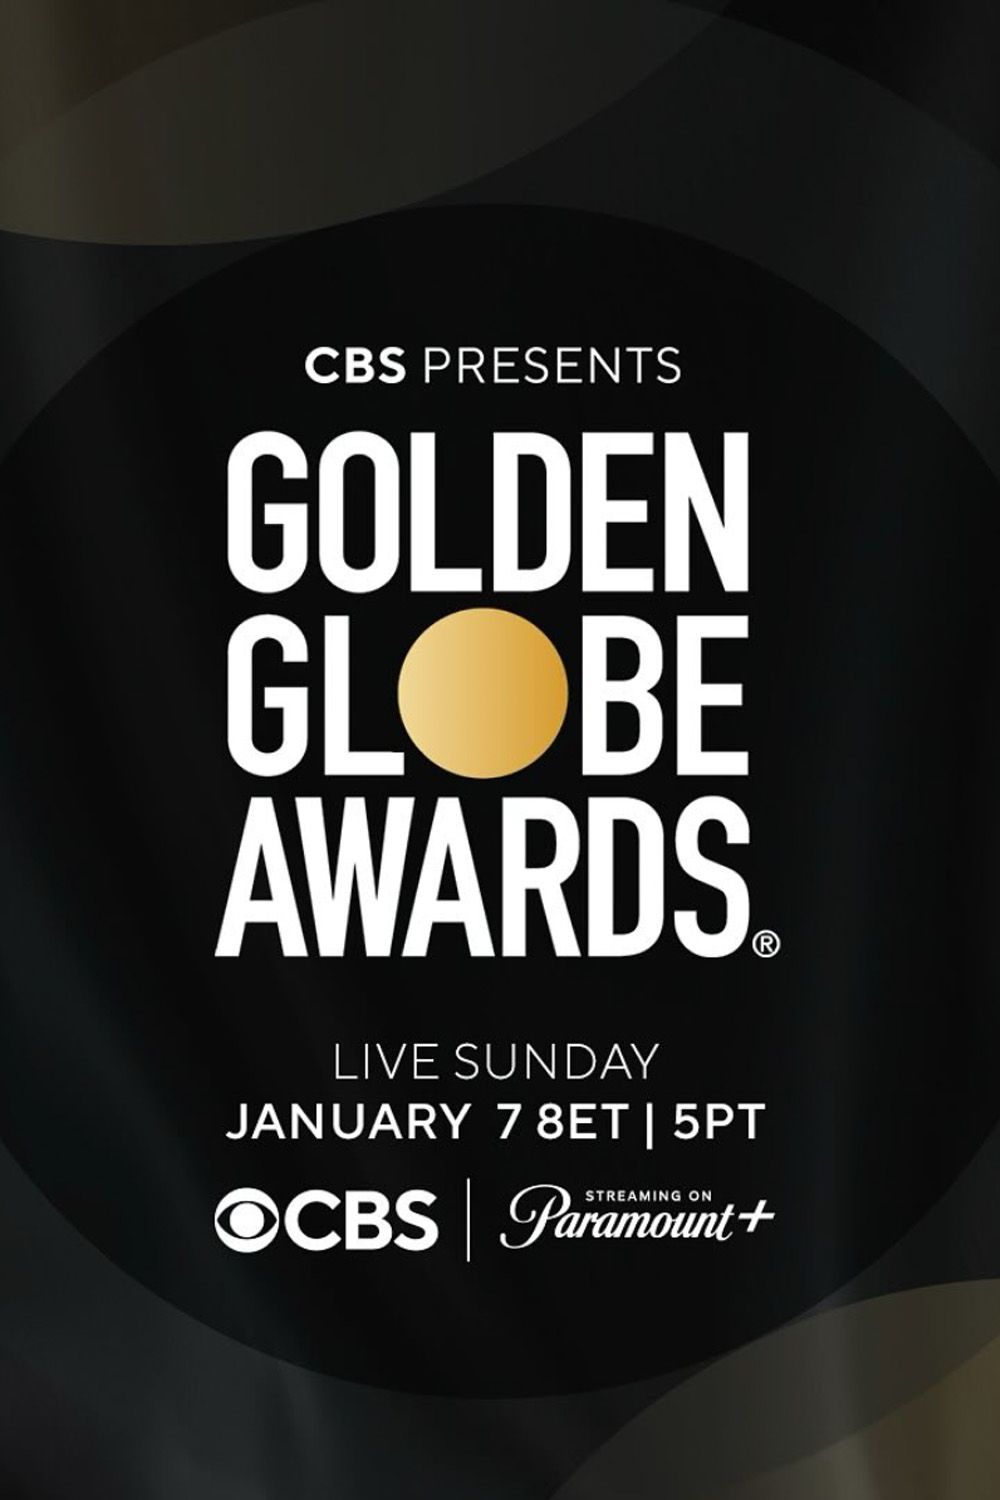 Golden Globes Awards Poster With Information for 2024 Event